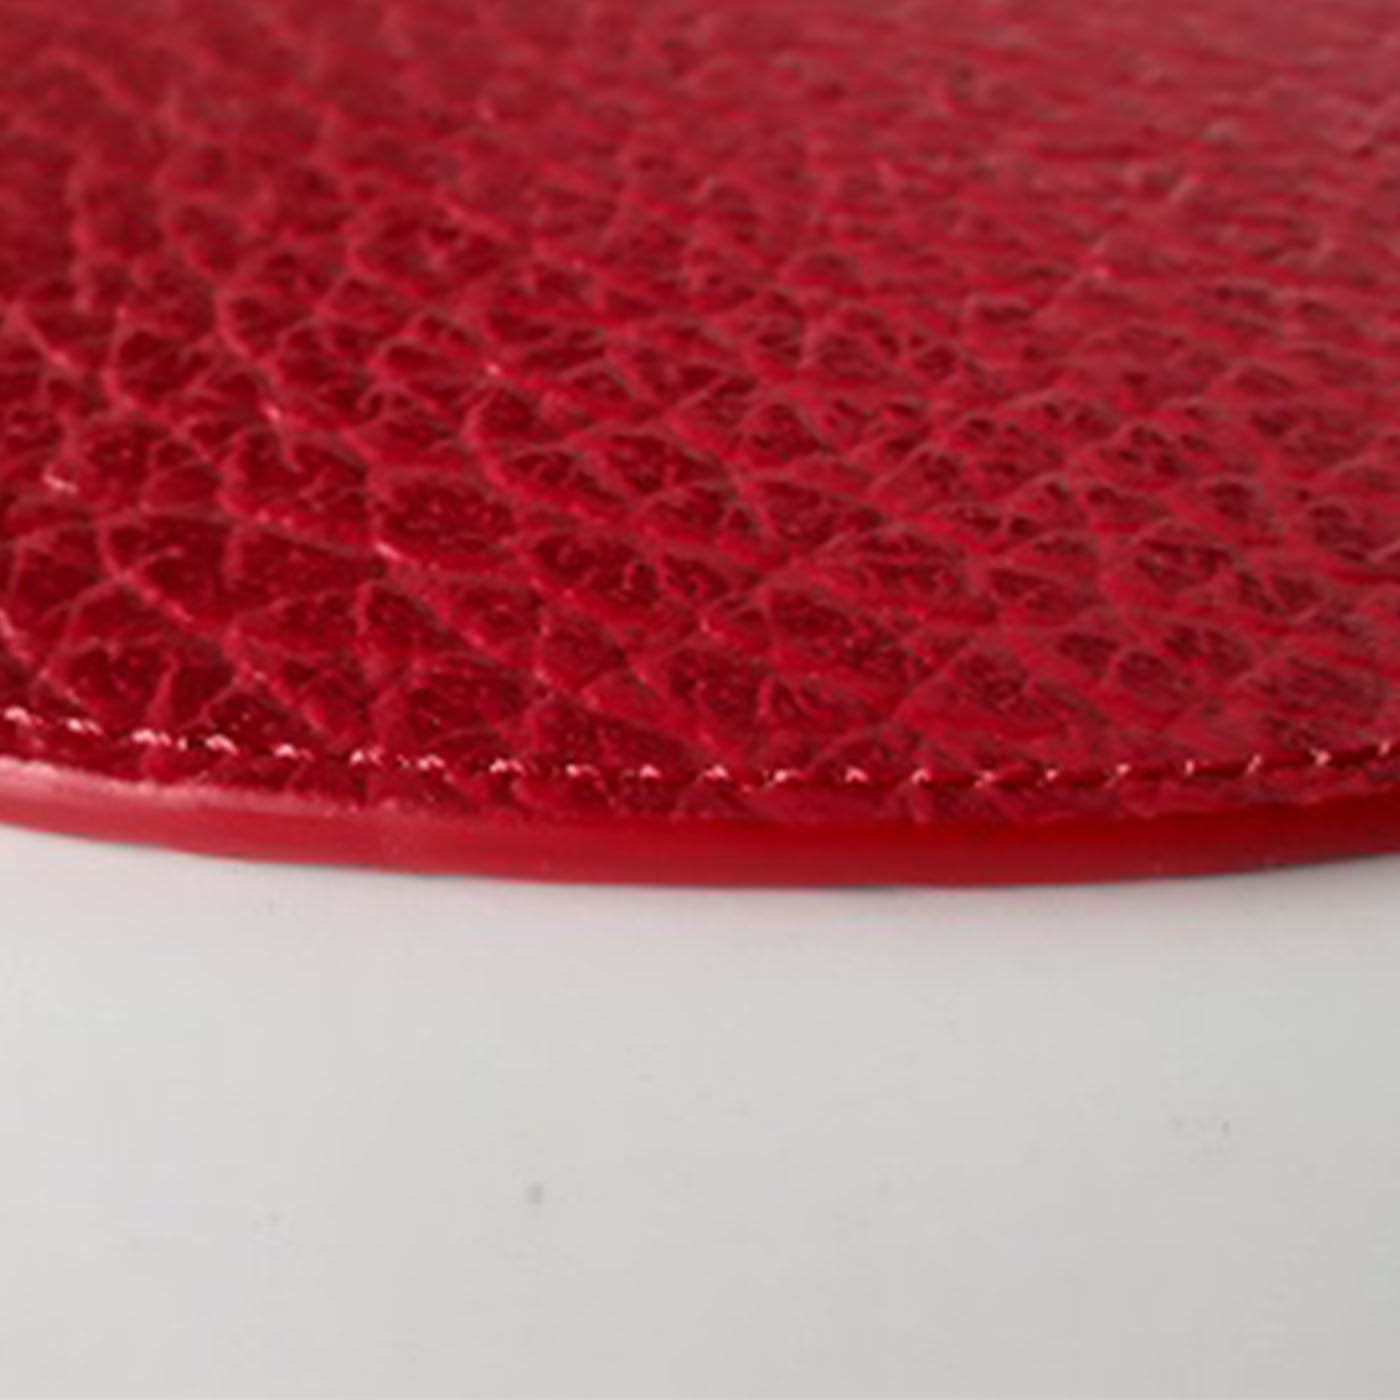 Tanzania Medium Set of 2 Round Red Leather Placemats - Alternative view 3